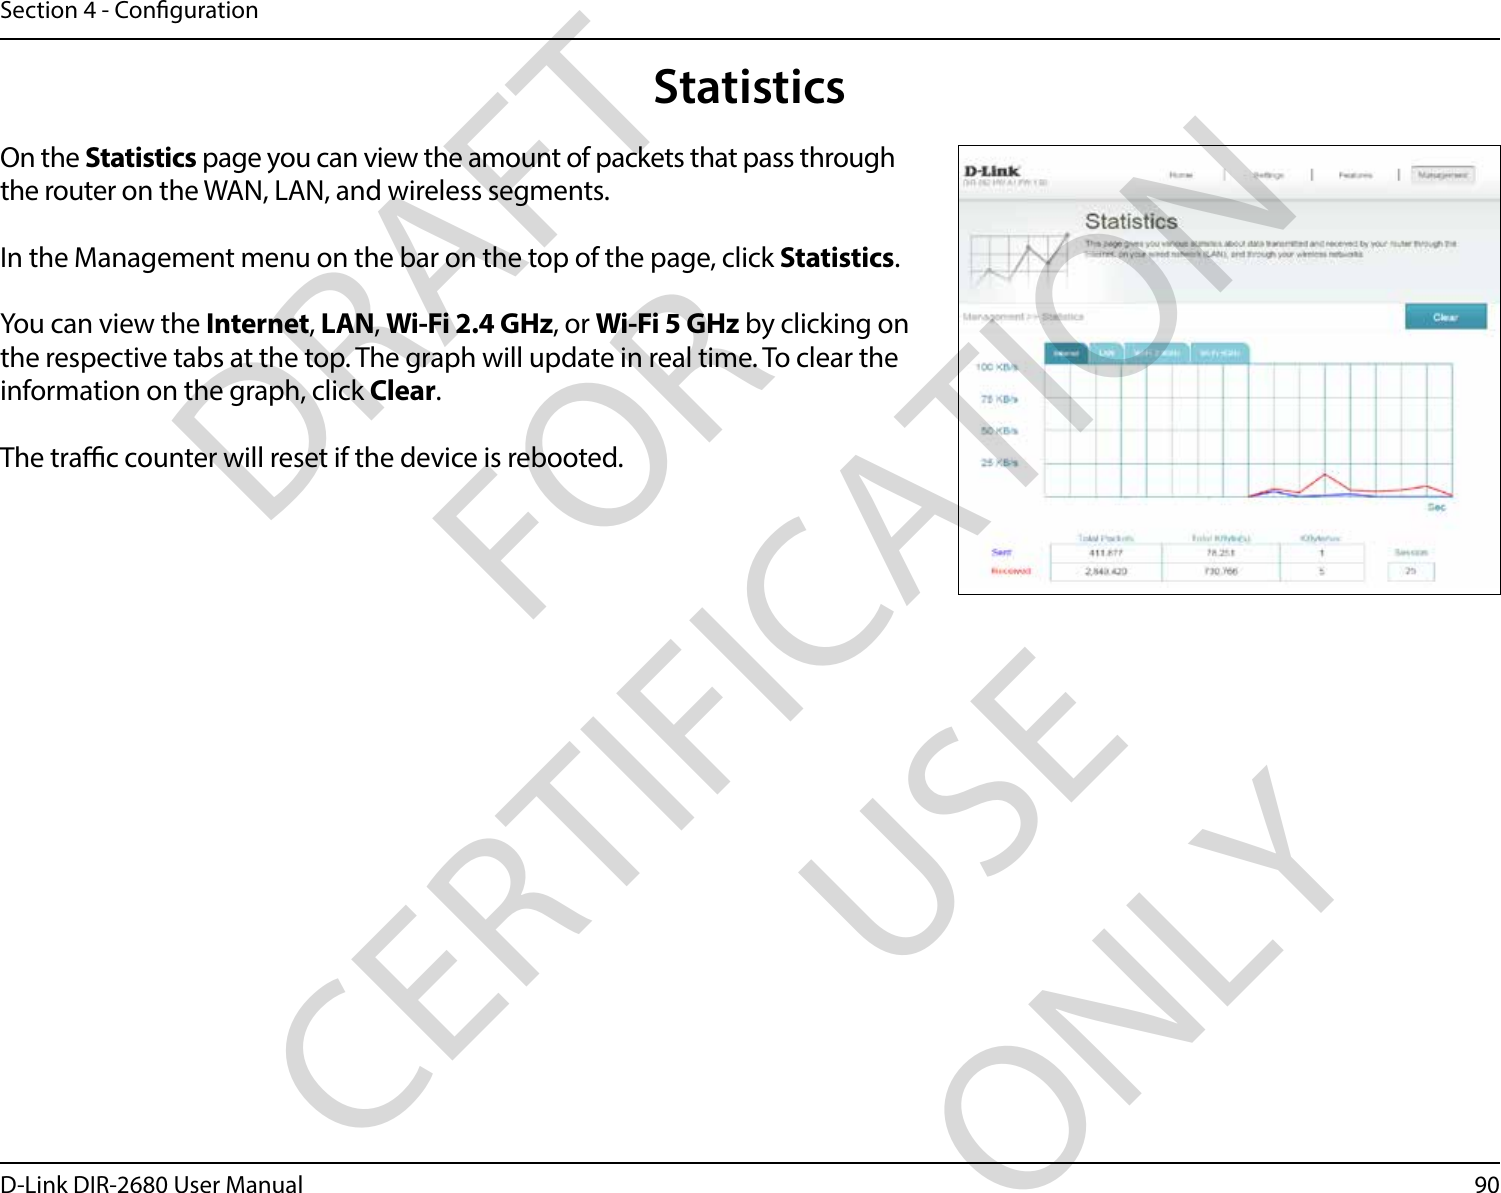 90D-Link DIR-2680 User ManualSection 4 - CongurationStatisticsOn the Statistics page you can view the amount of packets that pass through the router on the WAN, LAN, and wireless segments.In the Management menu on the bar on the top of the page, click Statistics.You can view the Internet, LAN, Wi-Fi 2.4 GHz, or Wi-Fi 5 GHz by clicking on the respective tabs at the top. The graph will update in real time. To clear the information on the graph, click Clear.The trac counter will reset if the device is rebooted.DRAFT FOR CERTIFICATION USE ONLY